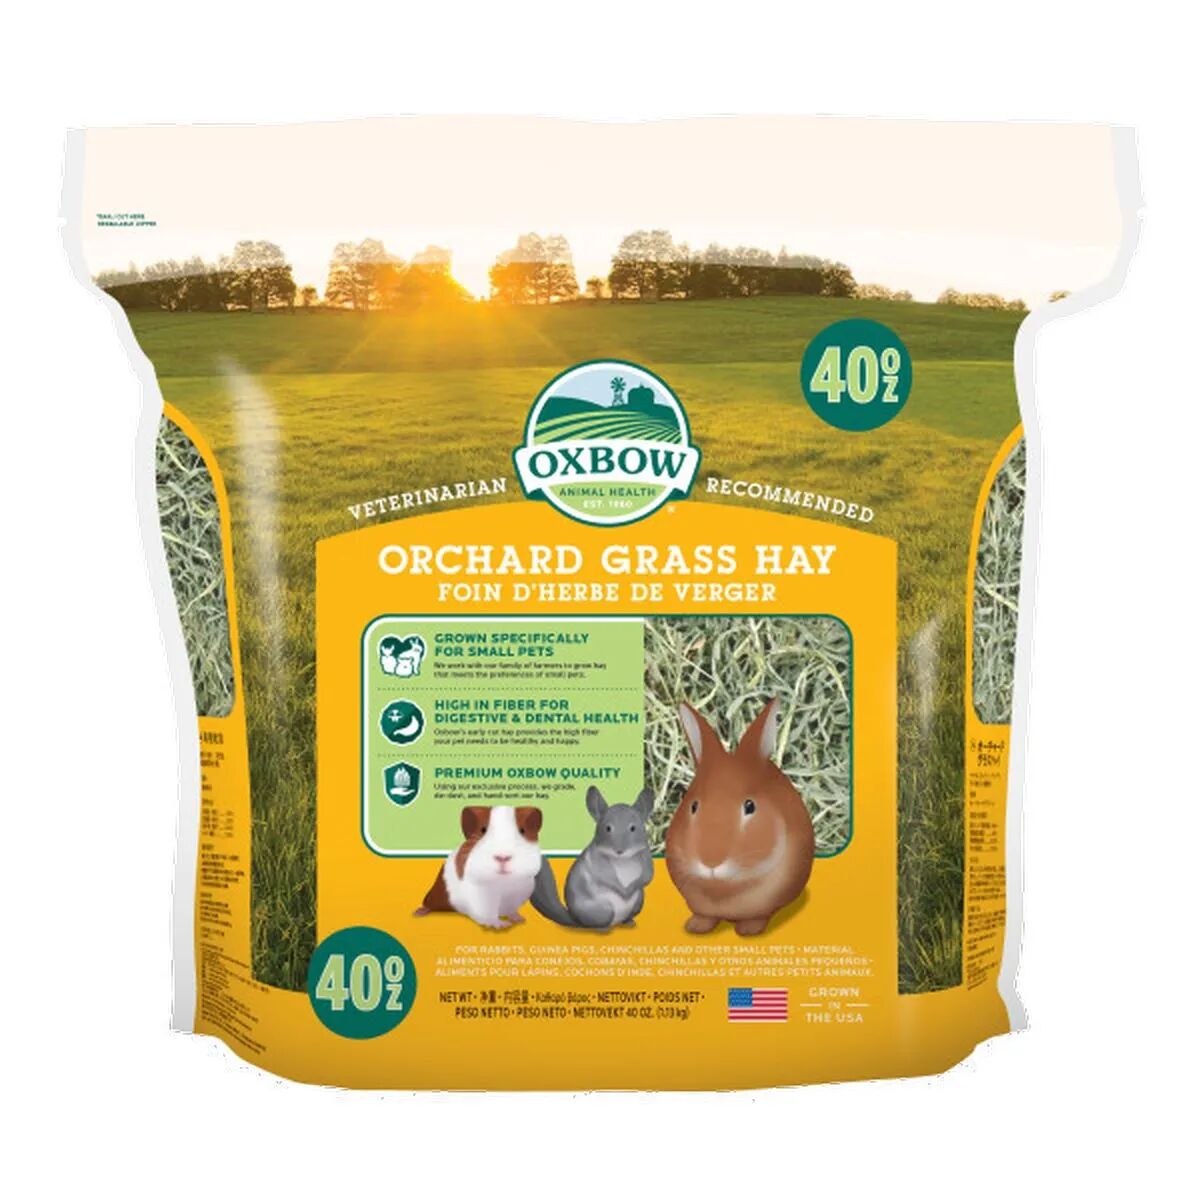 oxbow fieno orchard grass hay 1.13kg